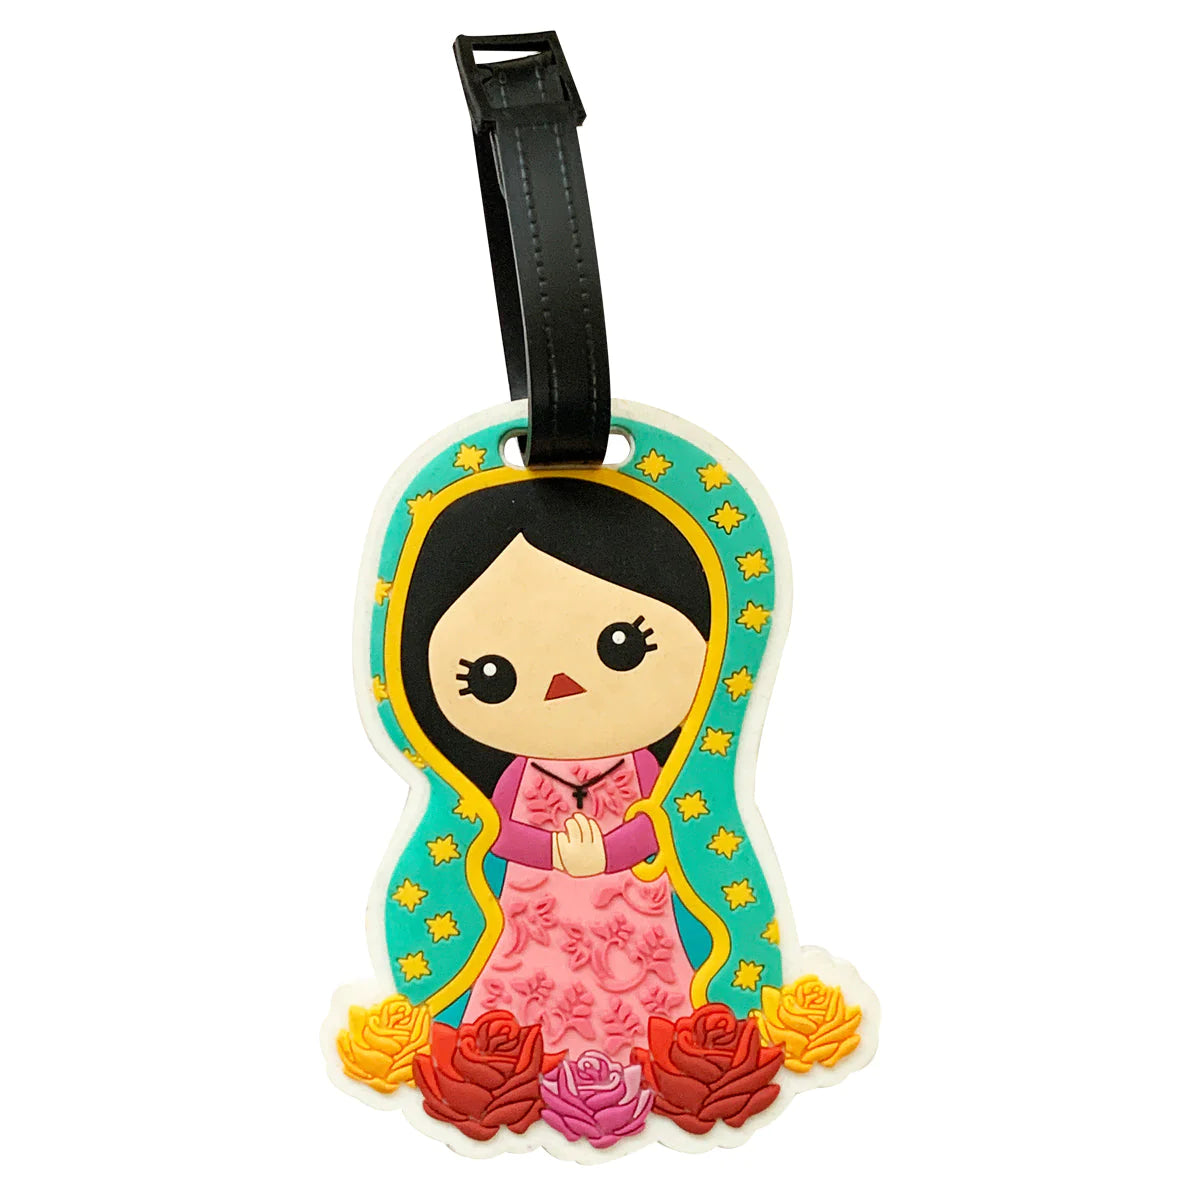 Virgin of Guadalupe luggage tag